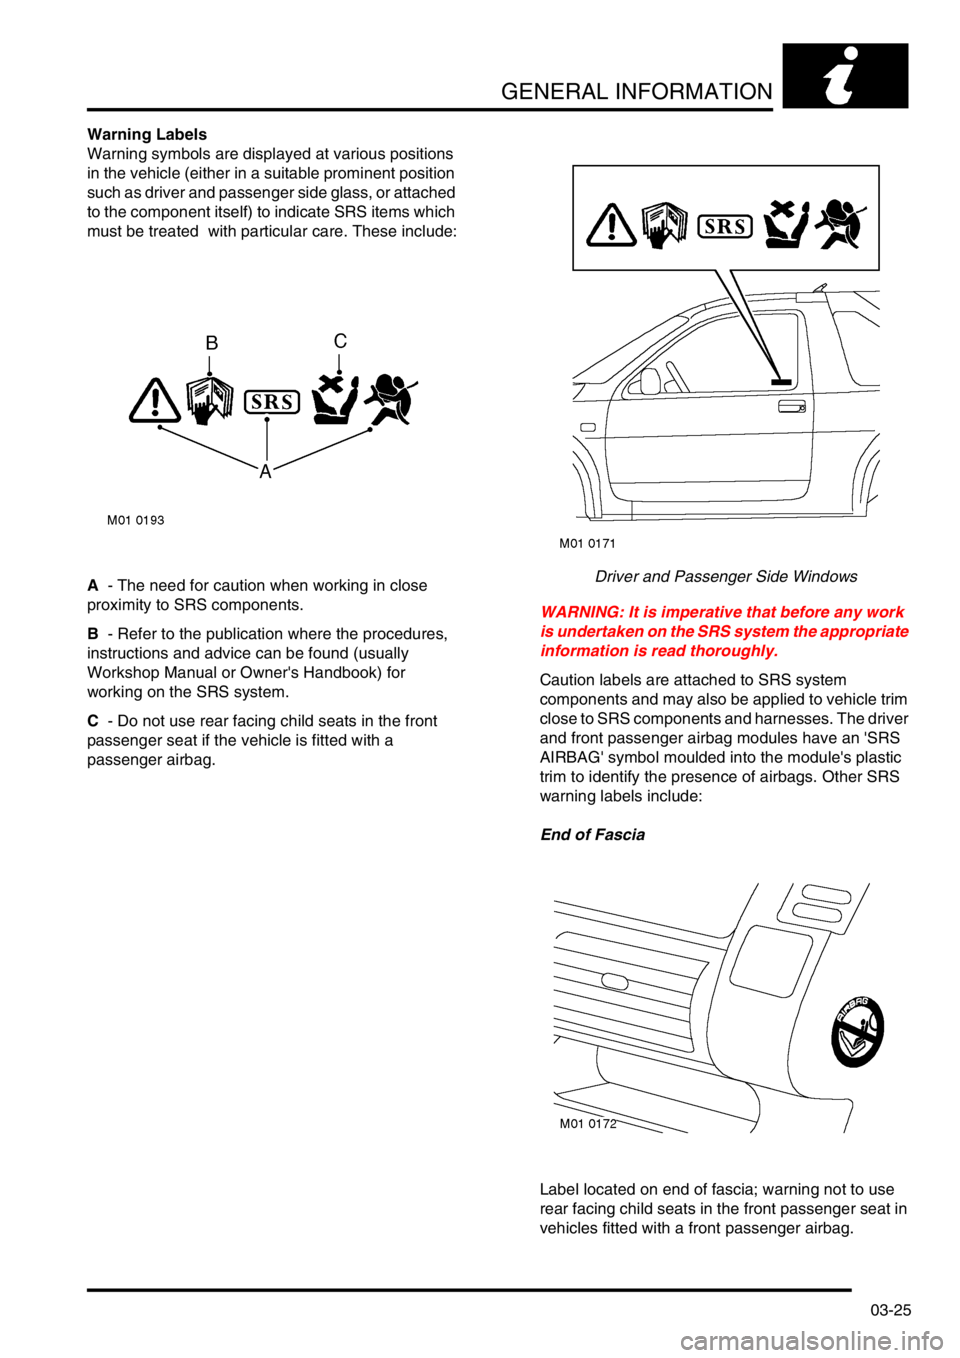 LAND ROVER FREELANDER 2001  Workshop Manual GENERAL INFORMATION
03-25
Warning Labels
Warning symbols are displayed at various positions 
in the vehicle (either in a suitable prominent position 
such as driver and passenger side glass, or attach